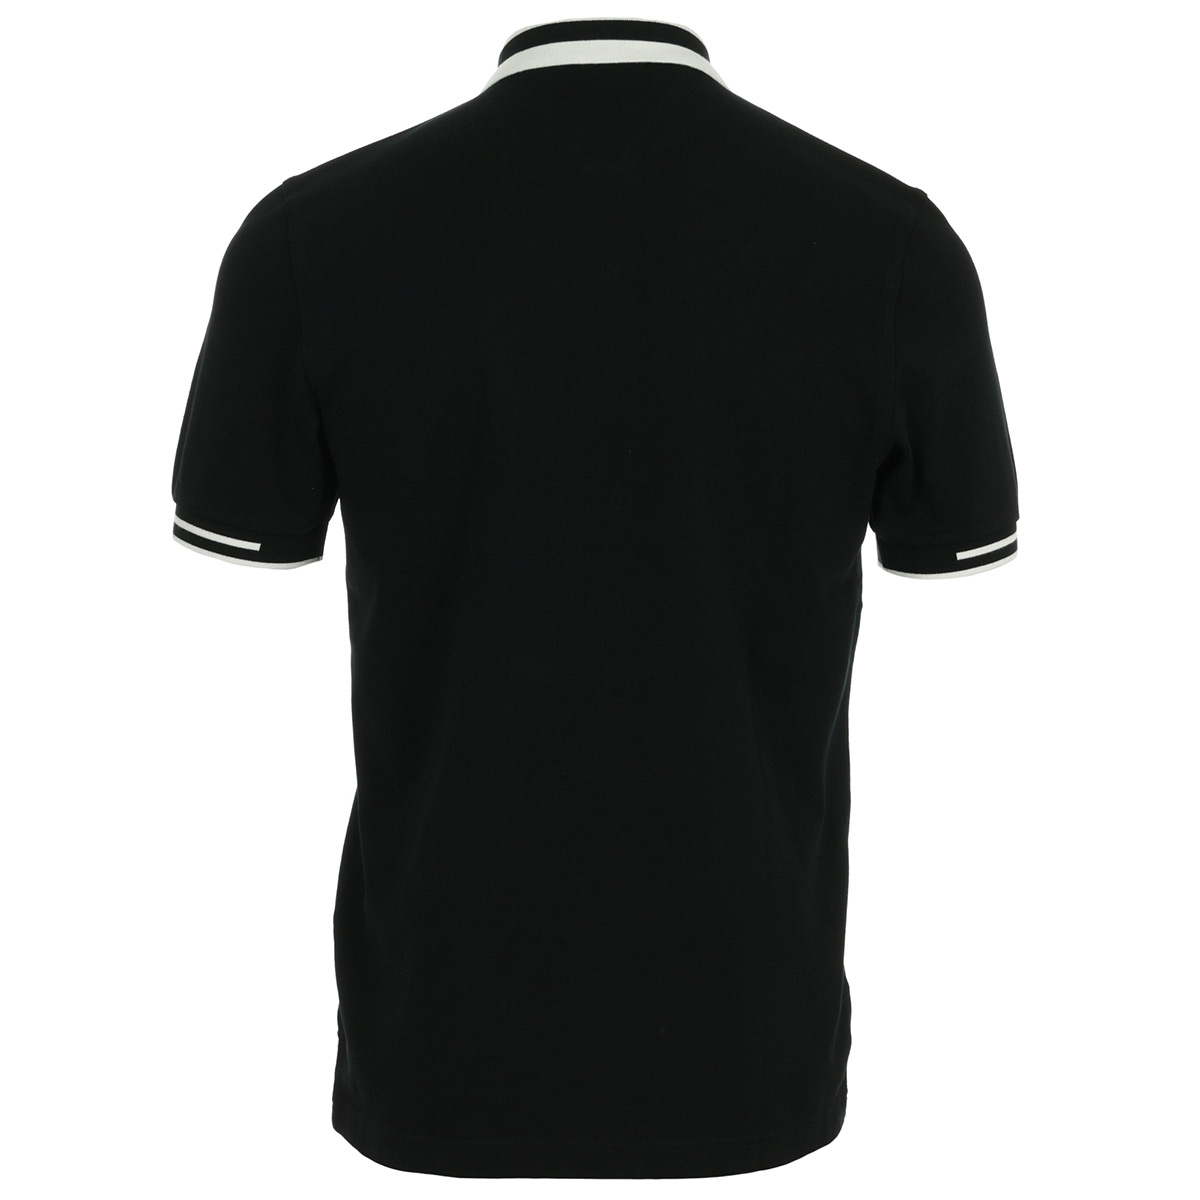 Fred Perry Block Tipped Polo Shirt